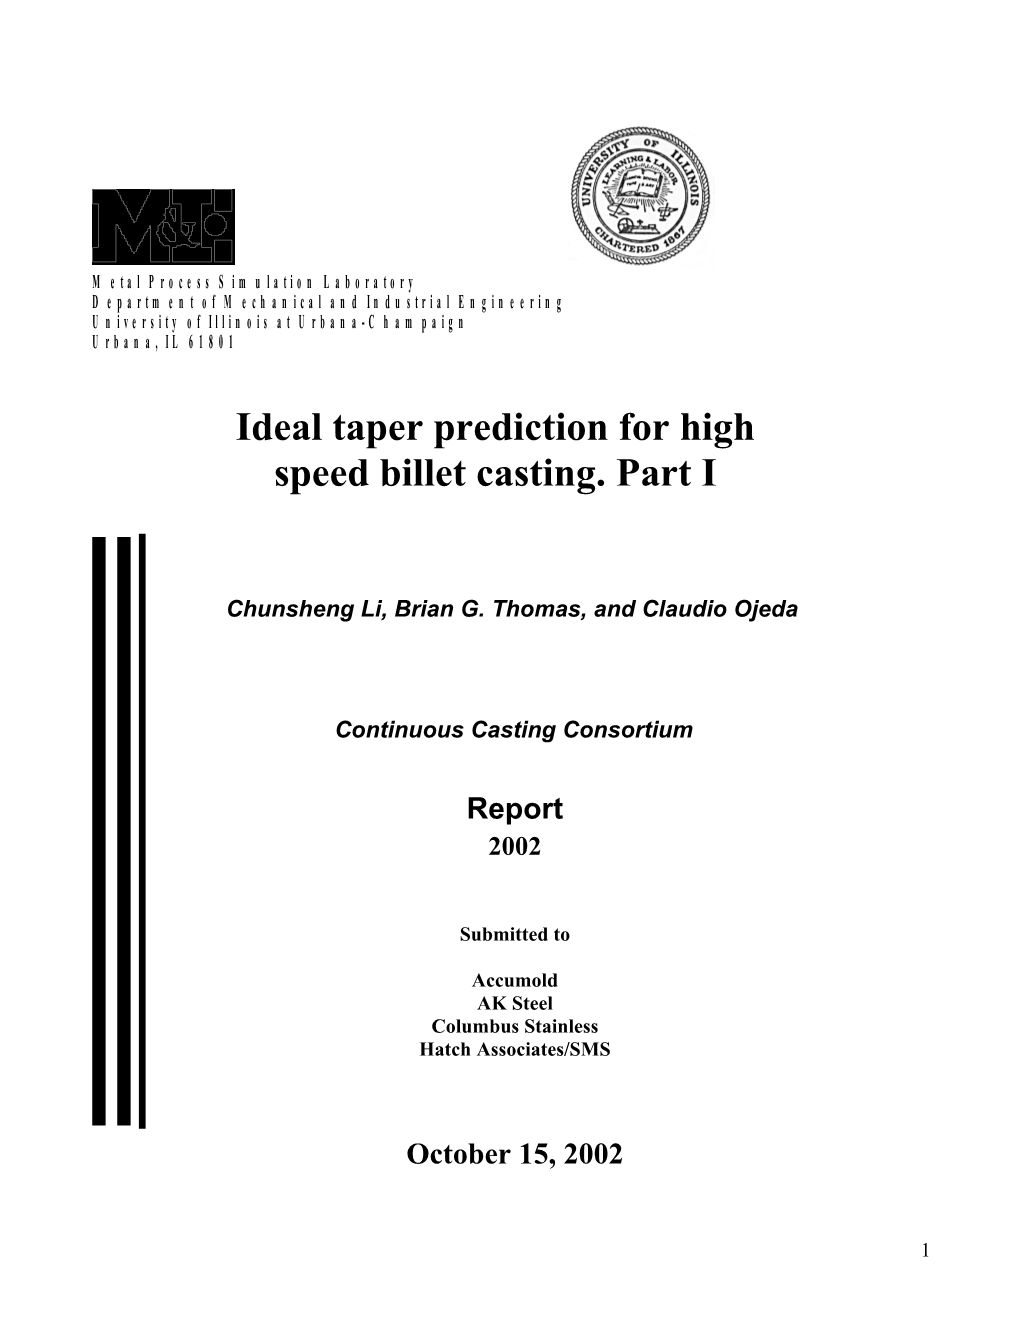 Ideal Taper Prediction for High Speed Billet Casting